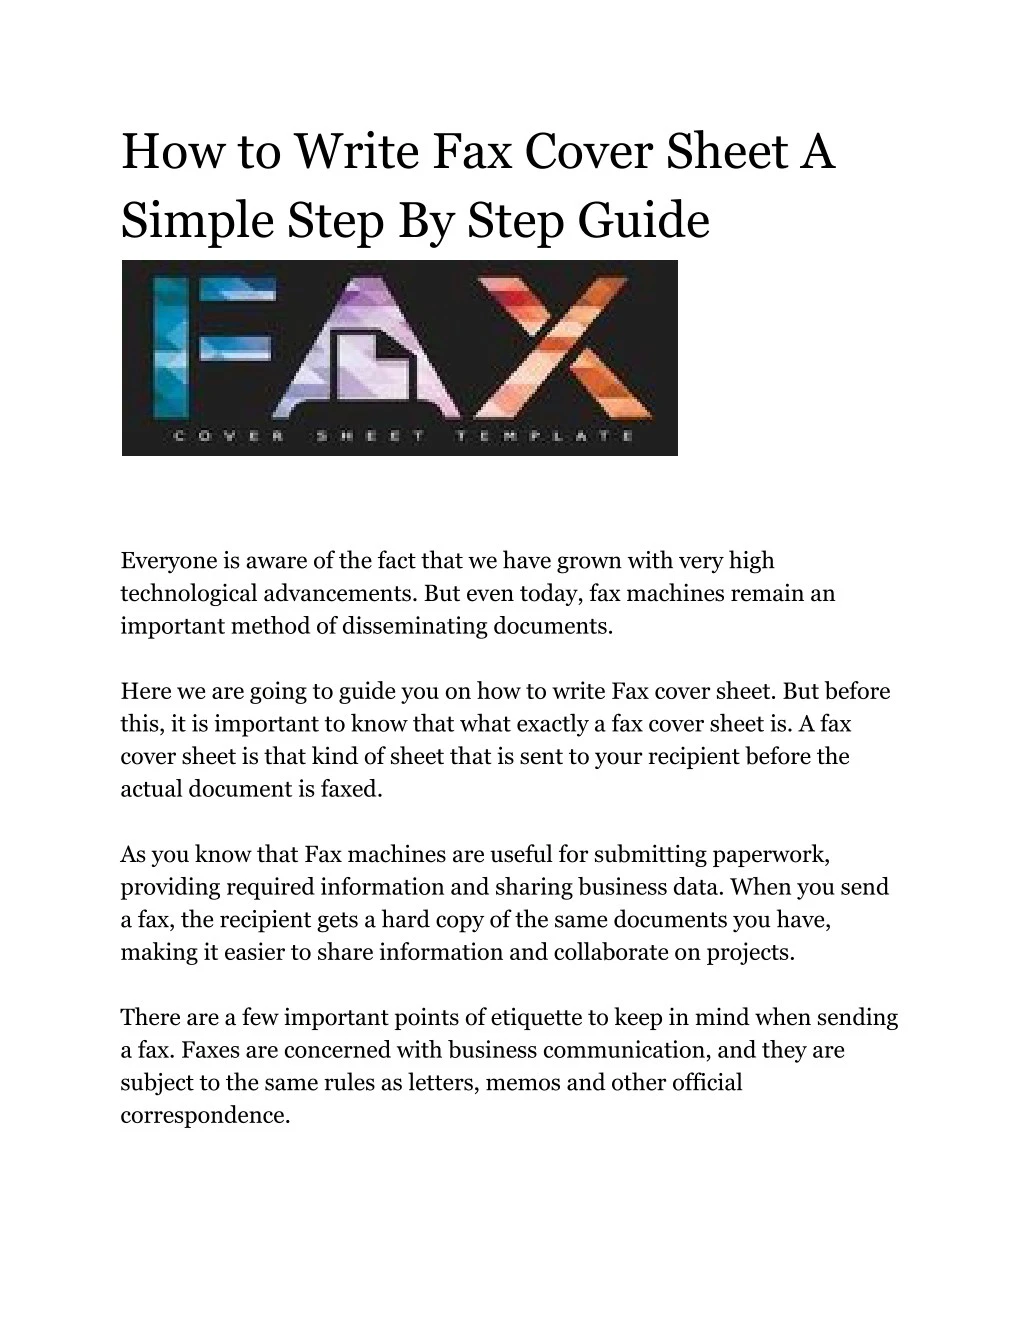 how to write fax cover sheet a simple step